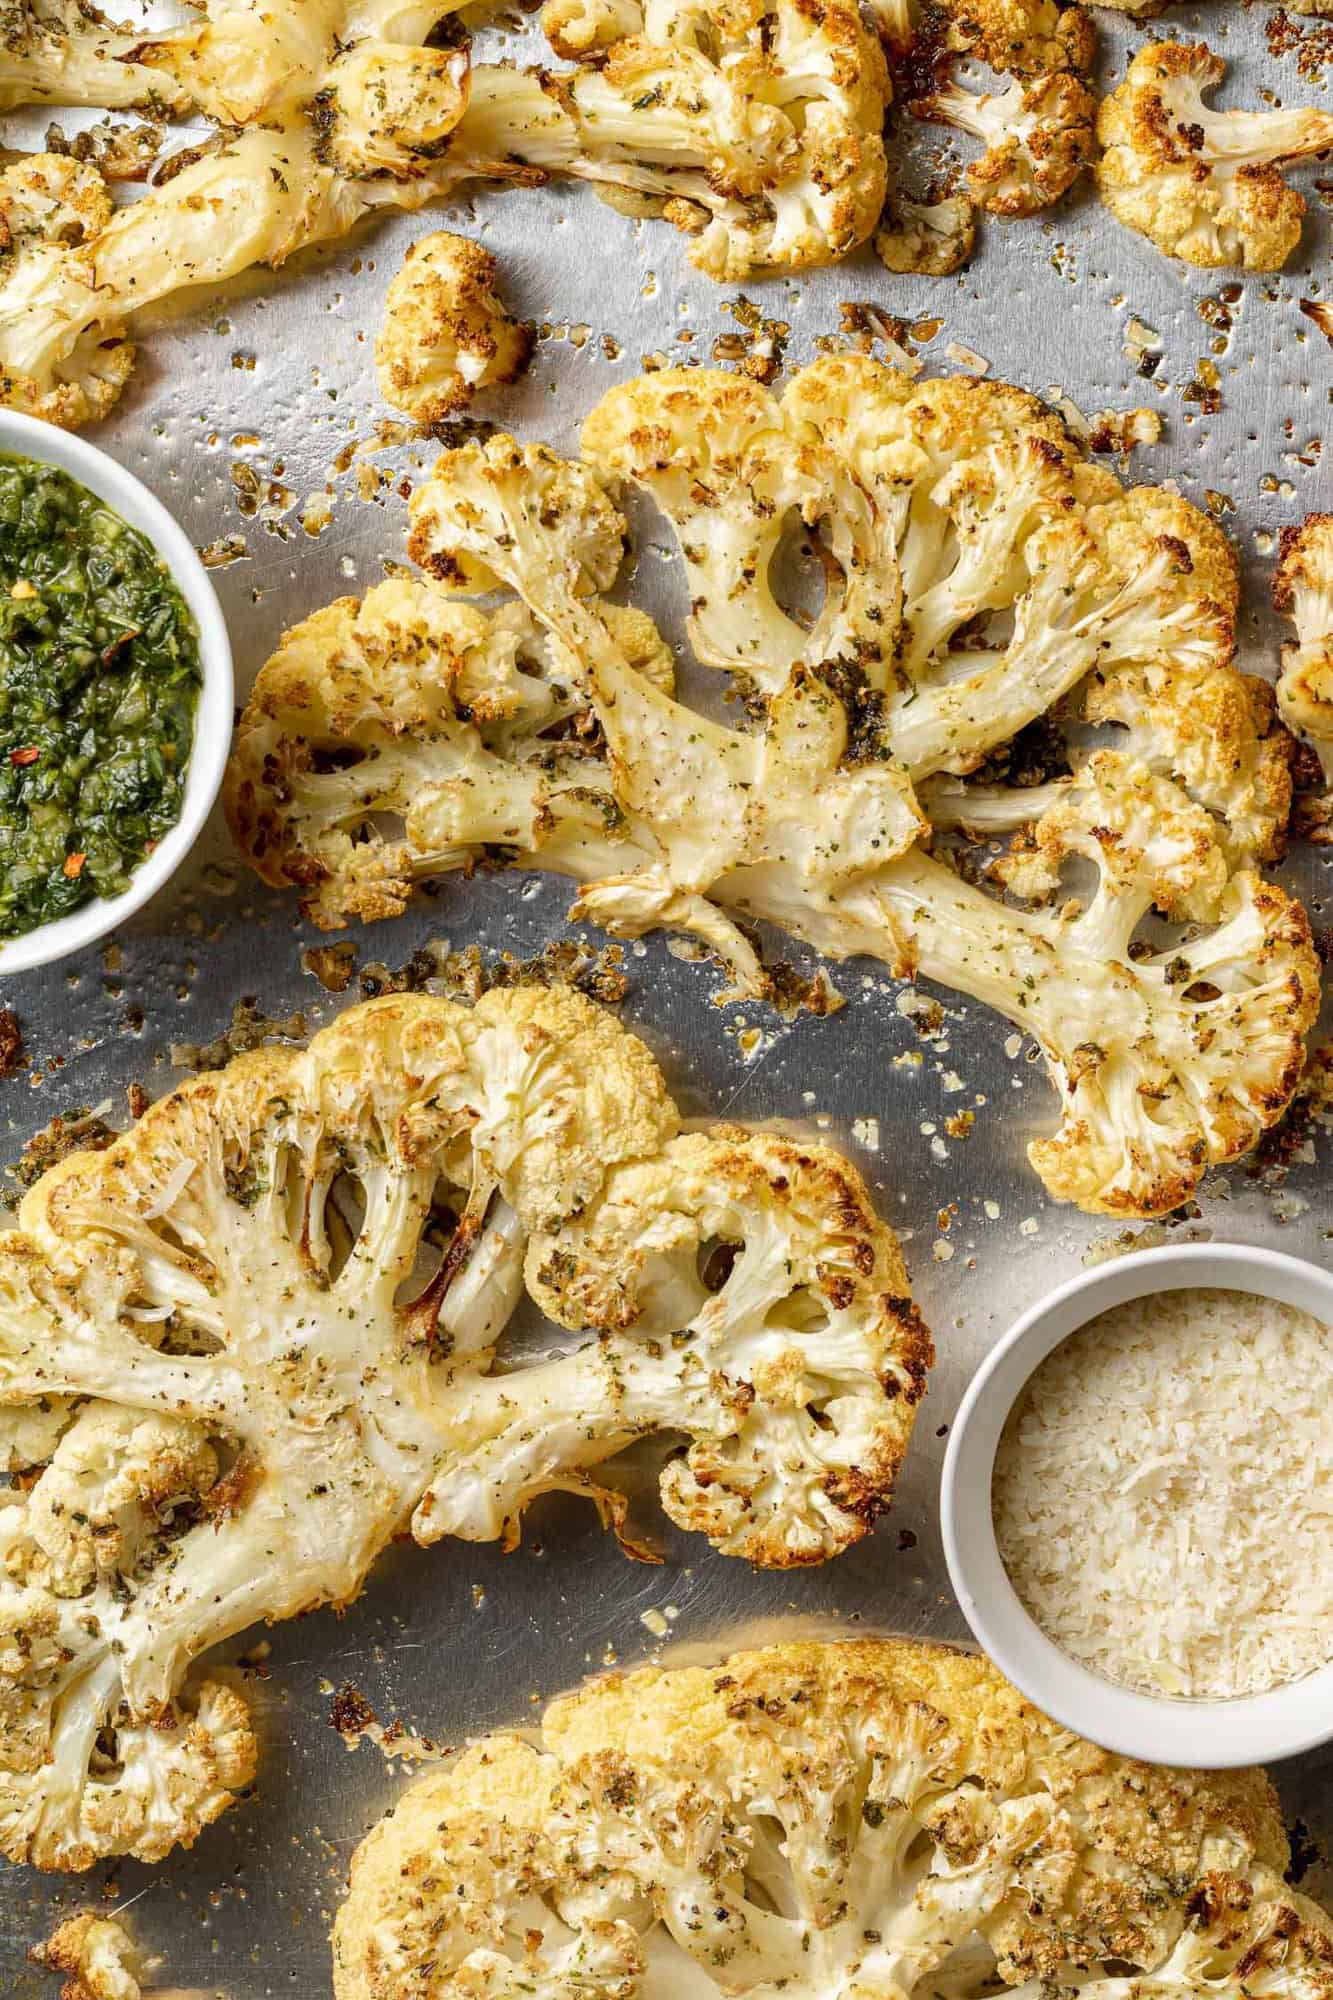 Cauliflower steaks shown on a sheet pan with parmesan and chimichurri.